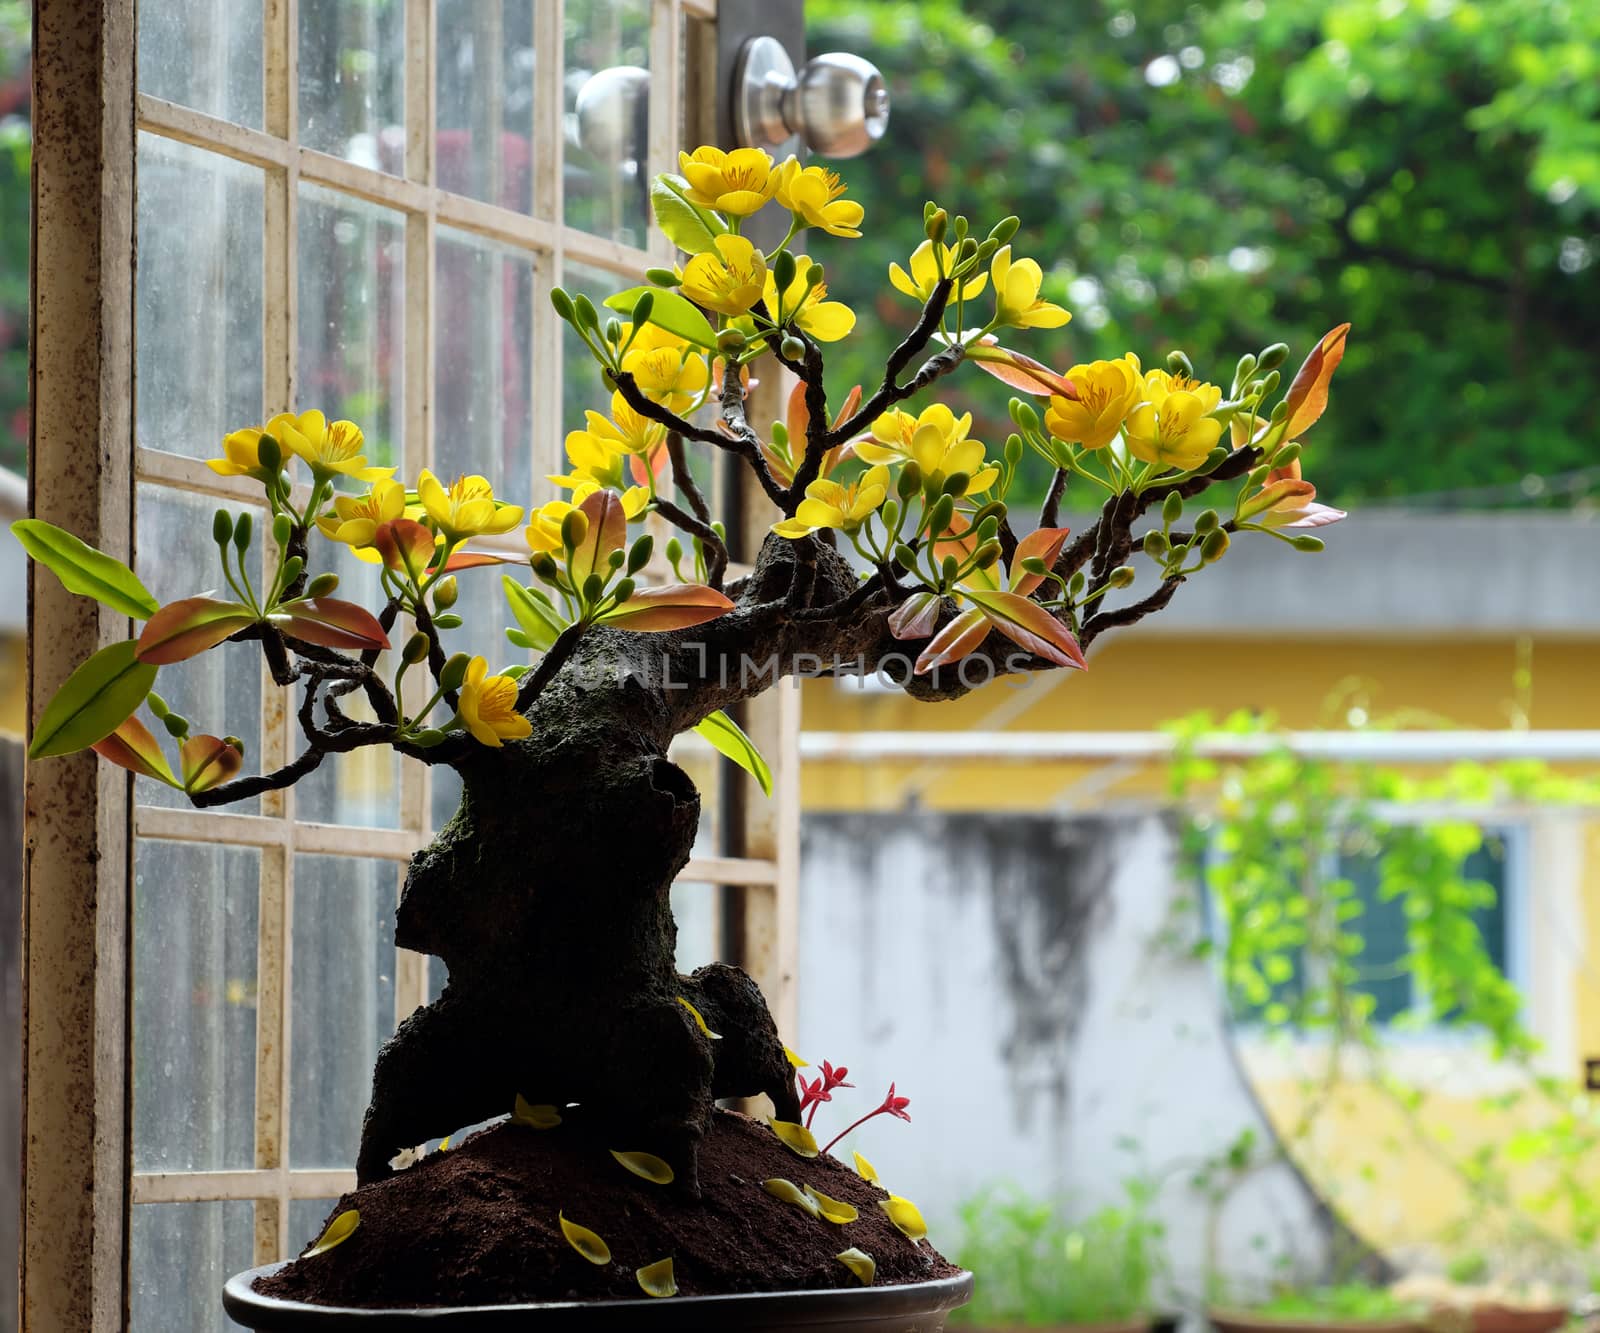 Vietnam spring flower for home decoration in springtime, handmade apricot blossom make from clay, amazing artwork with shade on white background, this kind of bonsai is tradition ornament on tet